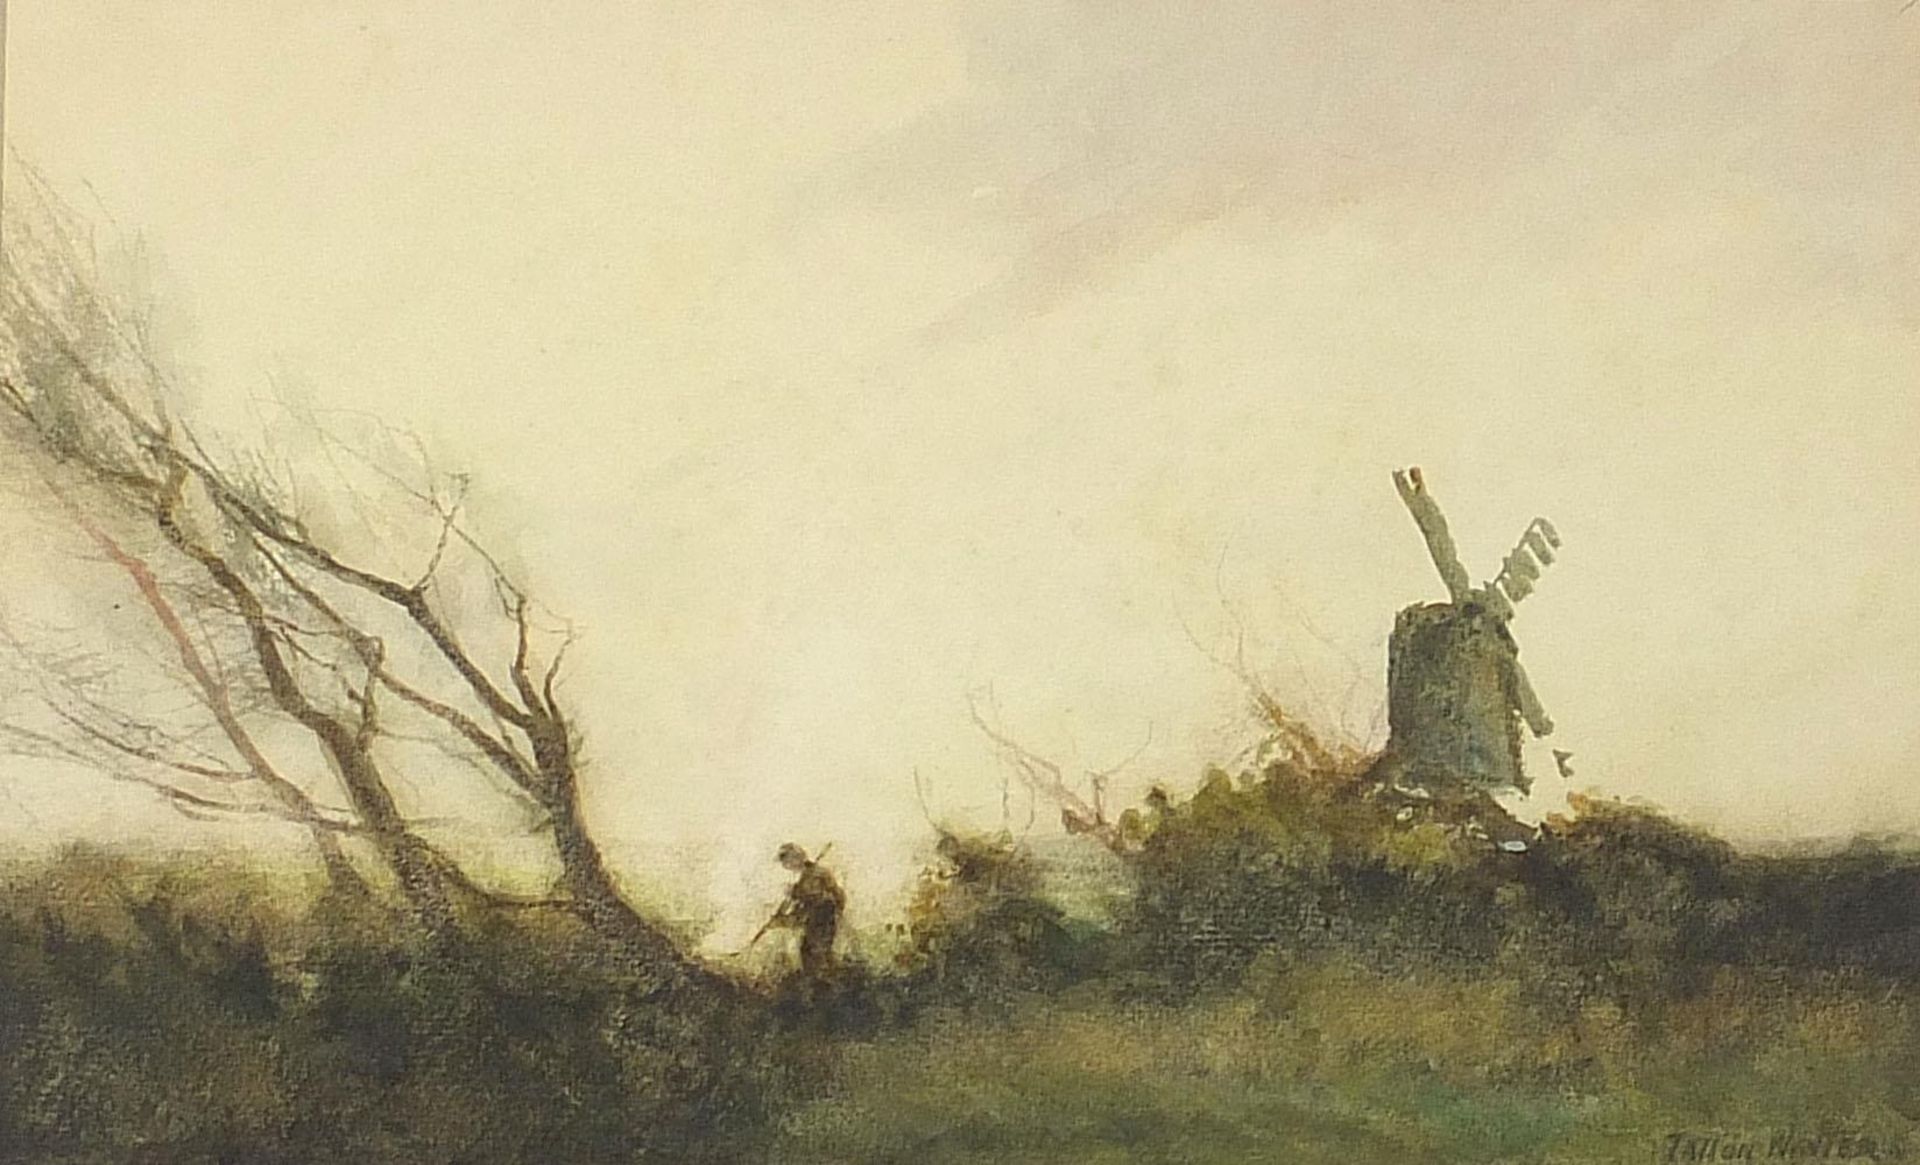 William Tatton Winter - Figure and trees beside a windmill, watercolour, J H Steer label verso,